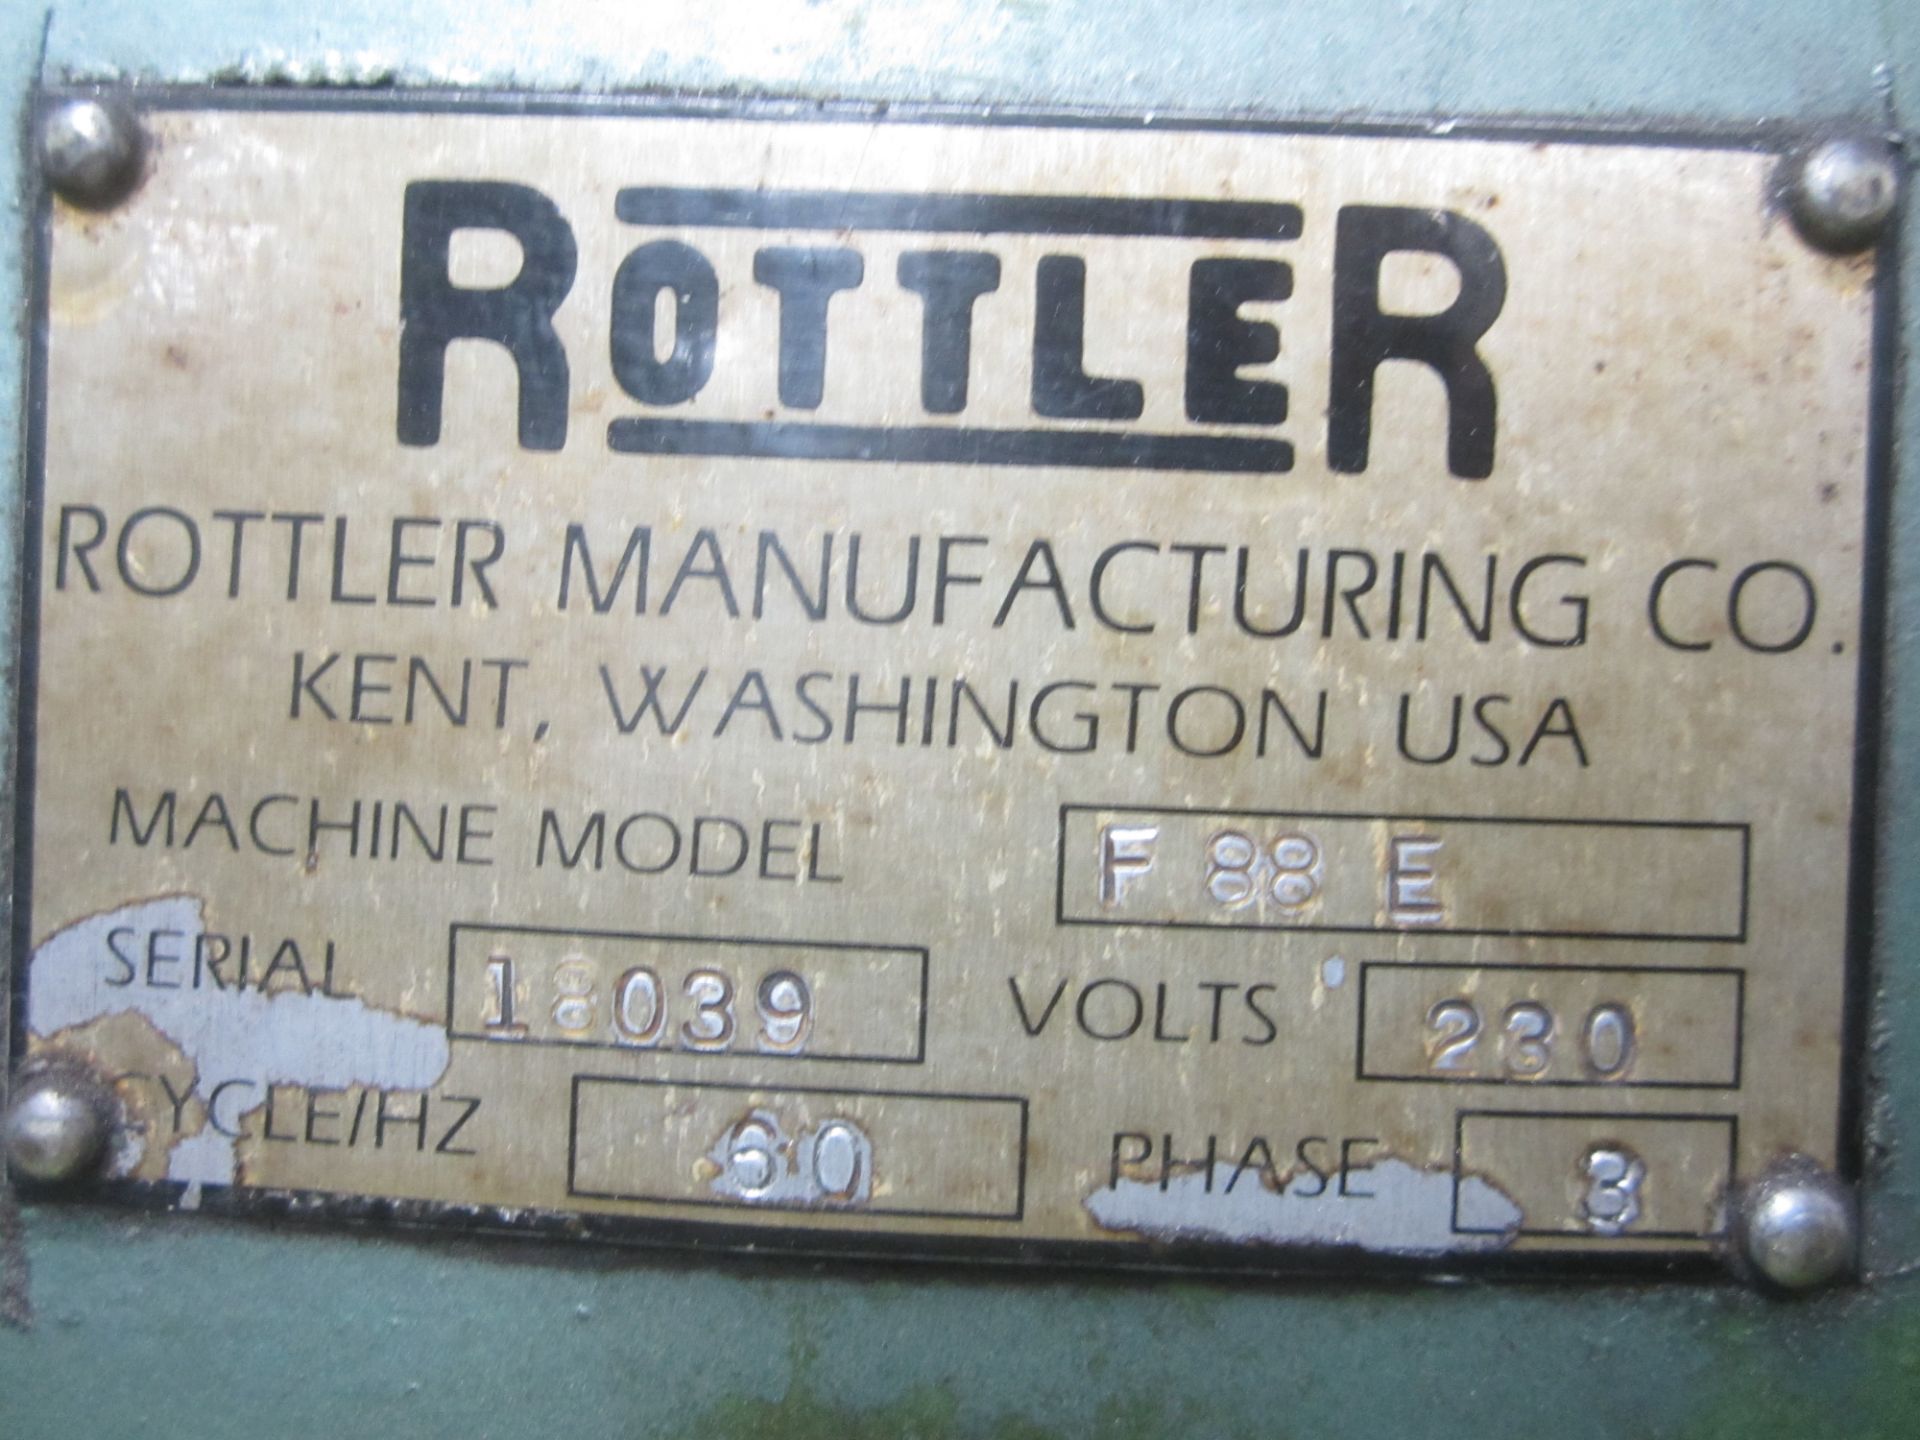 Rottler Model F-88-E Floor Type Vertical Cylinder Borer and Machining Mill, s/n 18039, with Burr- - Image 11 of 11